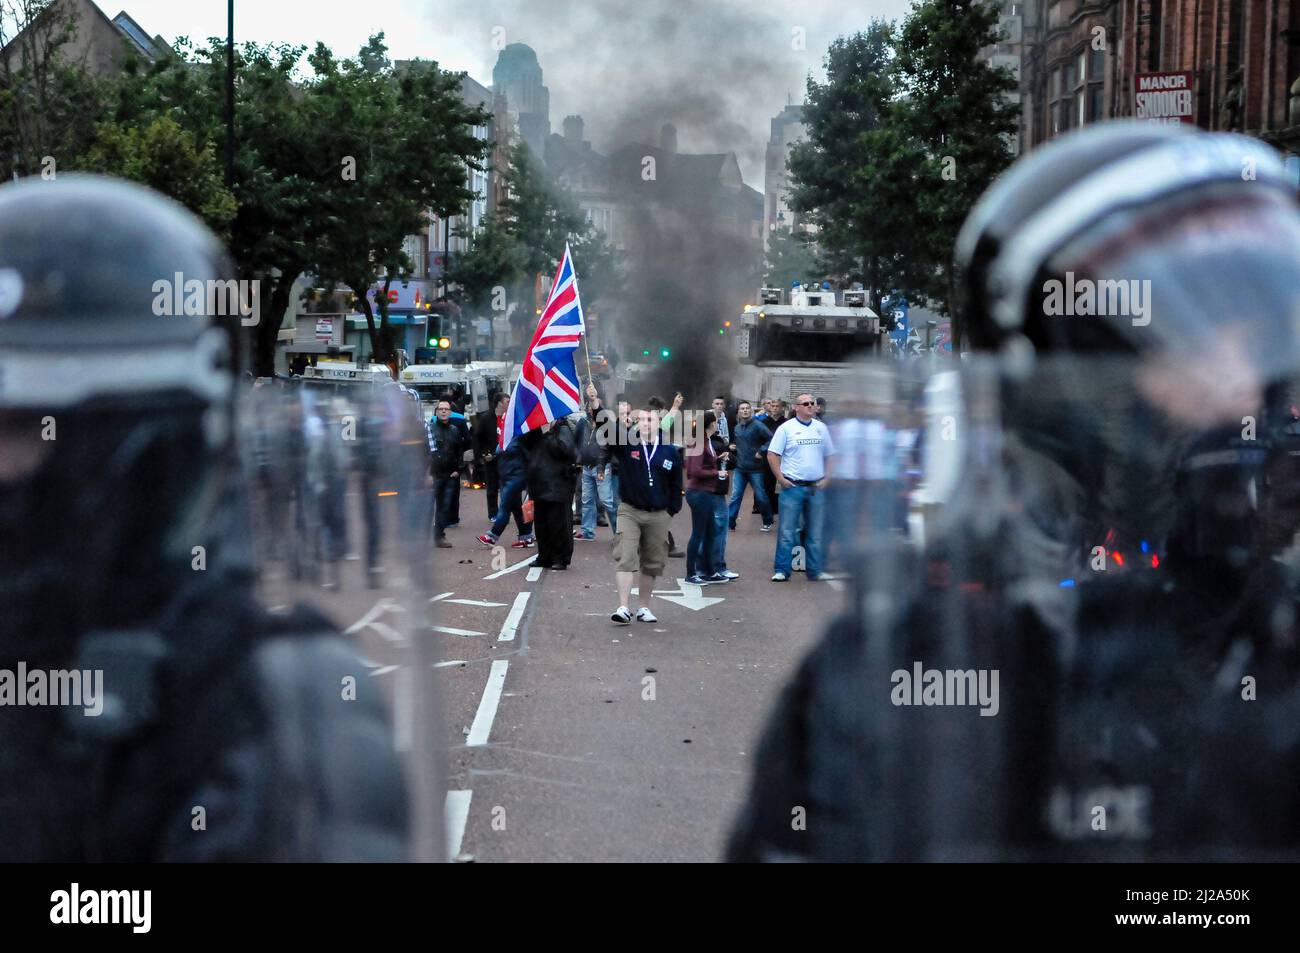 Belfast, Northern Ireland. 9th August 2013 - An anti-Internment parade by republicans sparks riots by protesting loyalists in Belfast Stock Photo